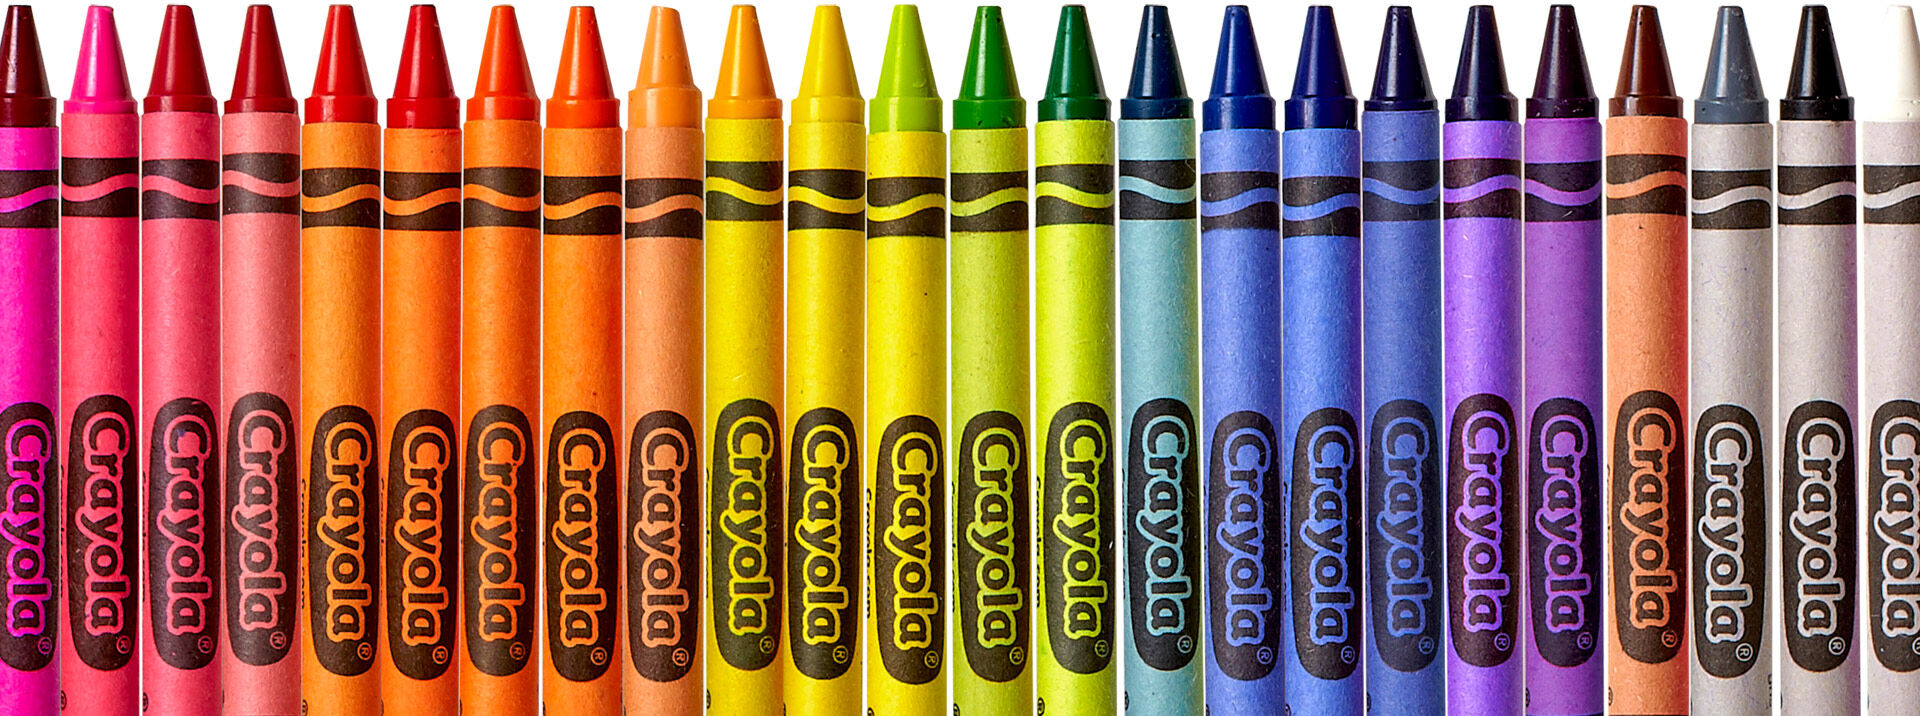 Crayola Crayons Shop Crayon Packs Boxes Crayola Effy Moom Free Coloring Picture wallpaper give a chance to color on the wall without getting in trouble! Fill the walls of your home or office with stress-relieving [effymoom.blogspot.com]